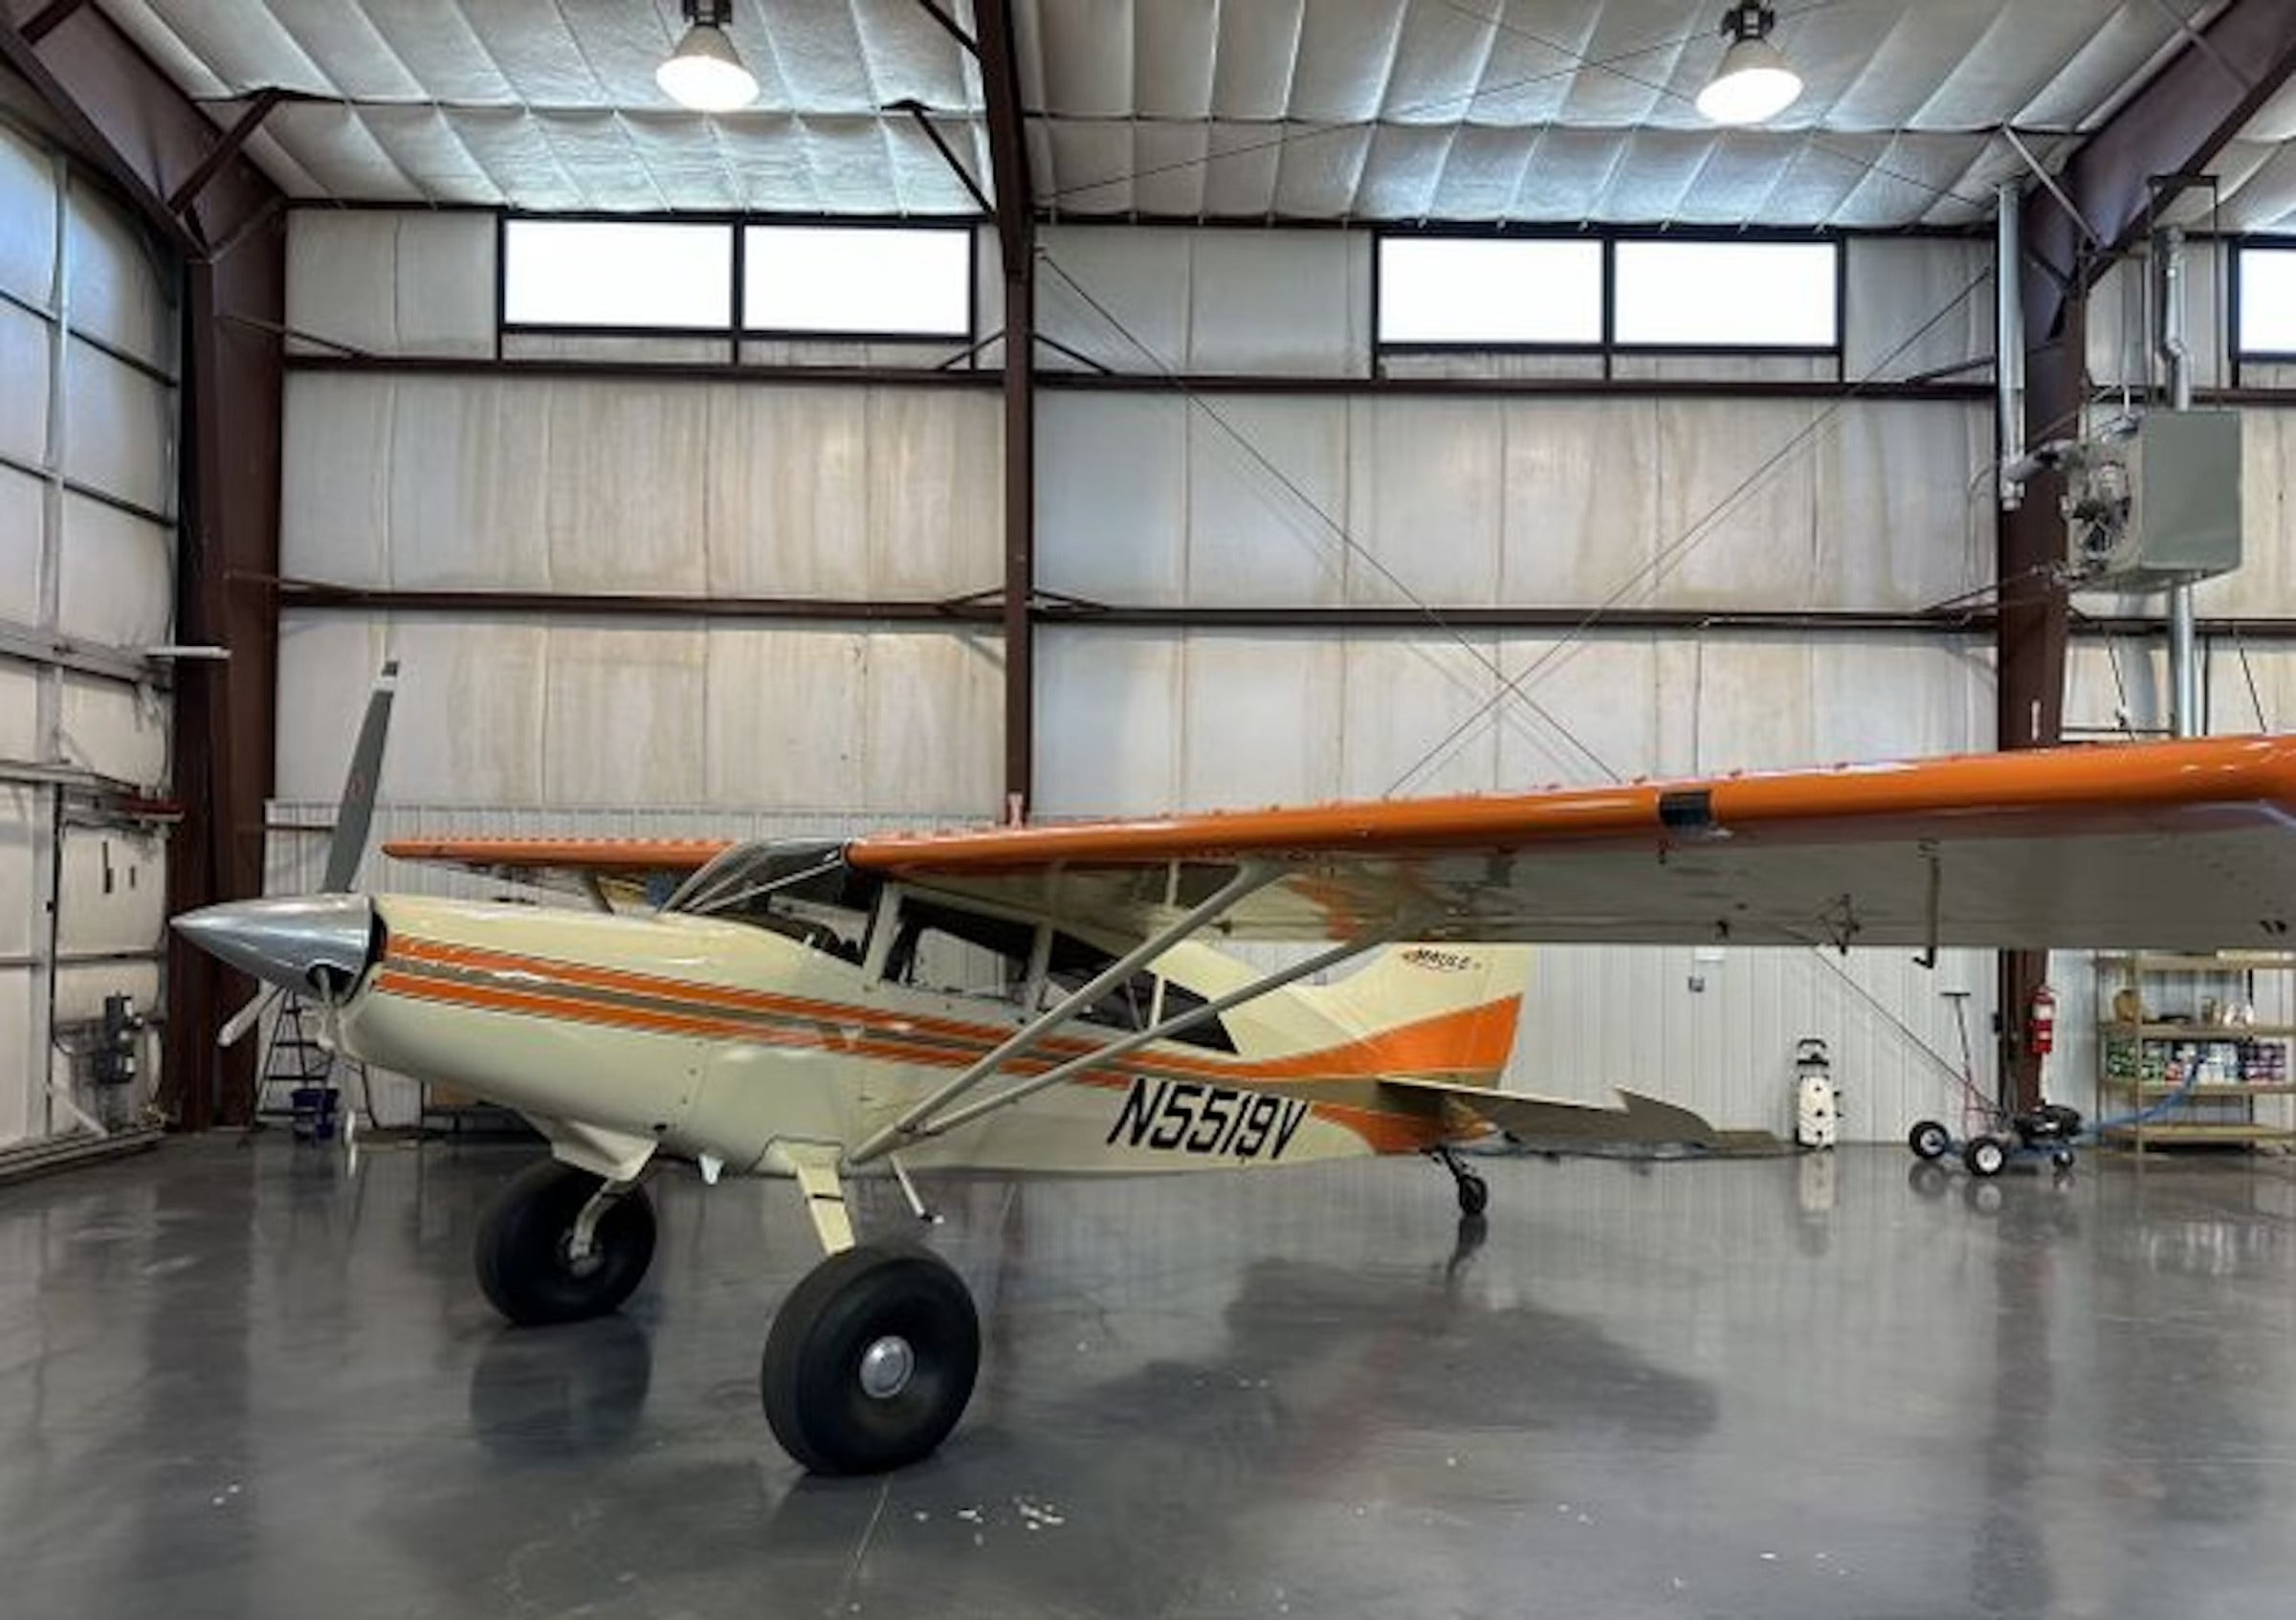 This 2004 Maule M-7-260C Is a Direct Route to Adventure and an ‘AircraftForSale’ Top Pick